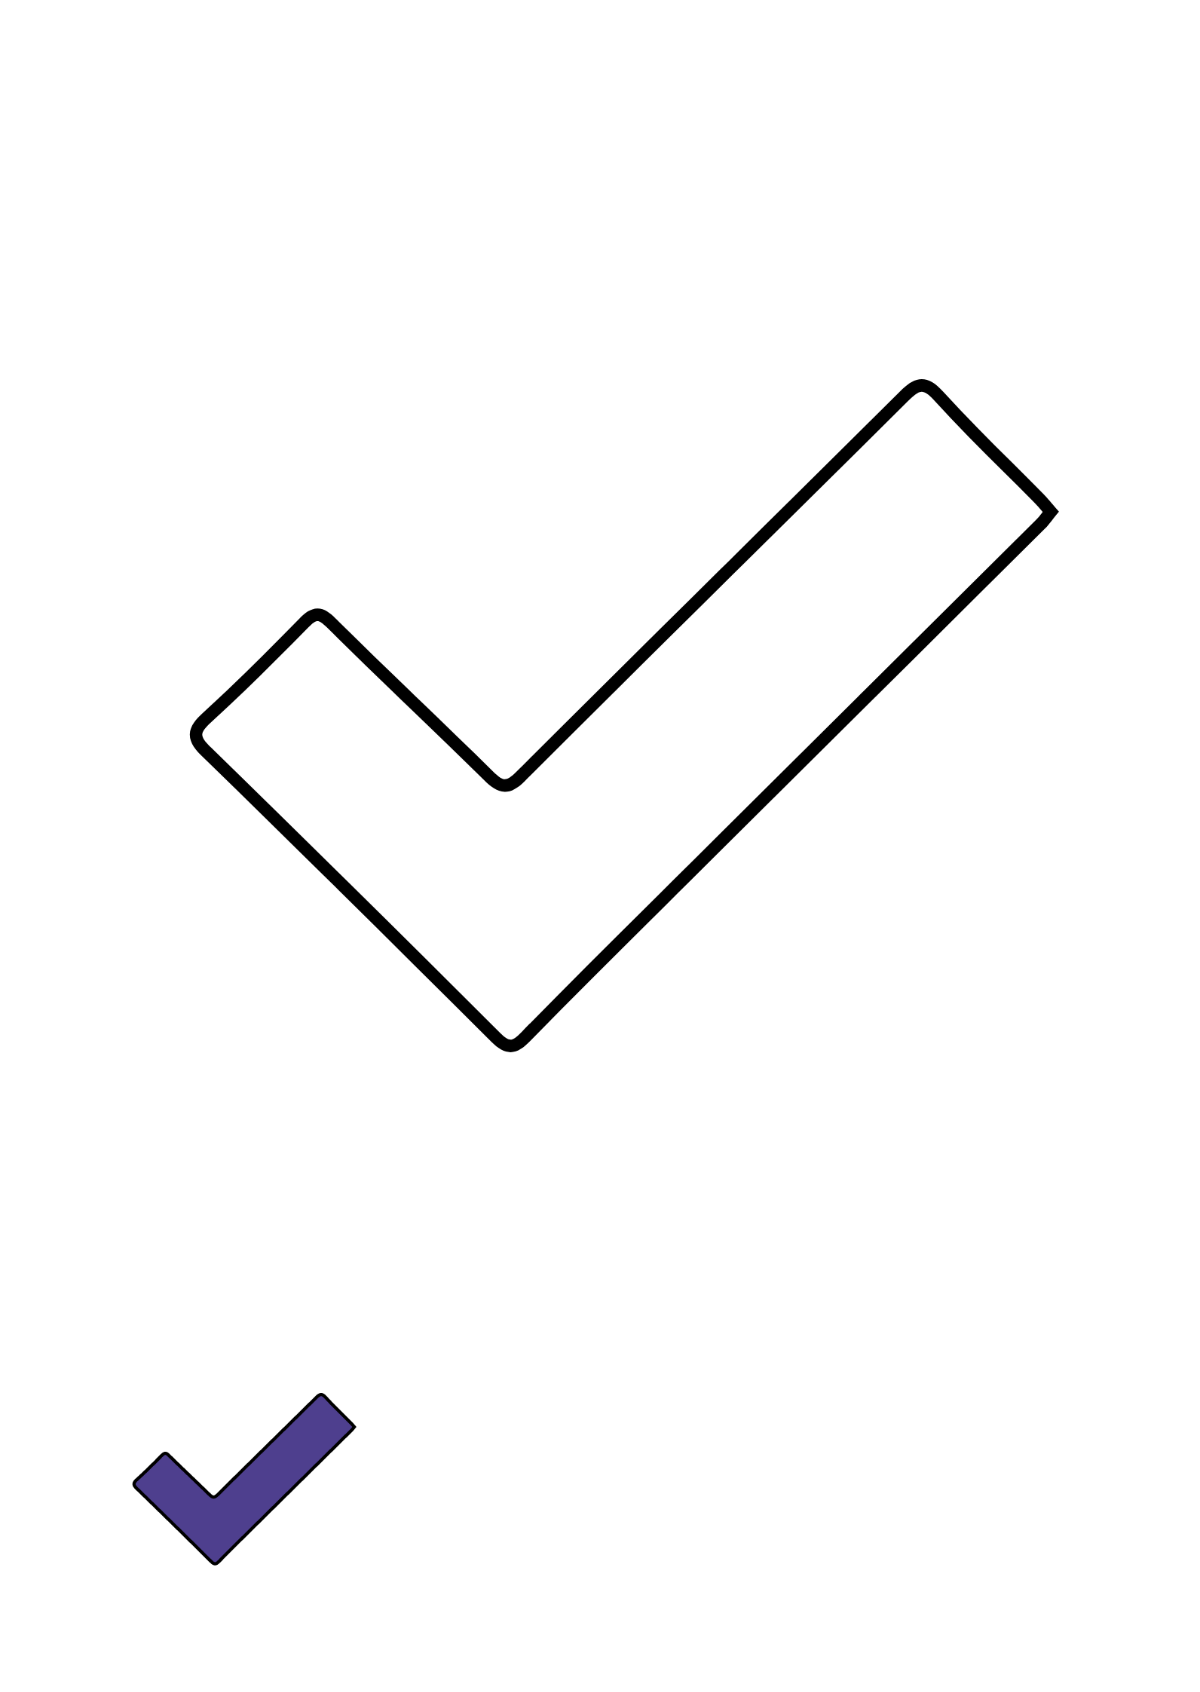 Small Check Mark coloring page Template